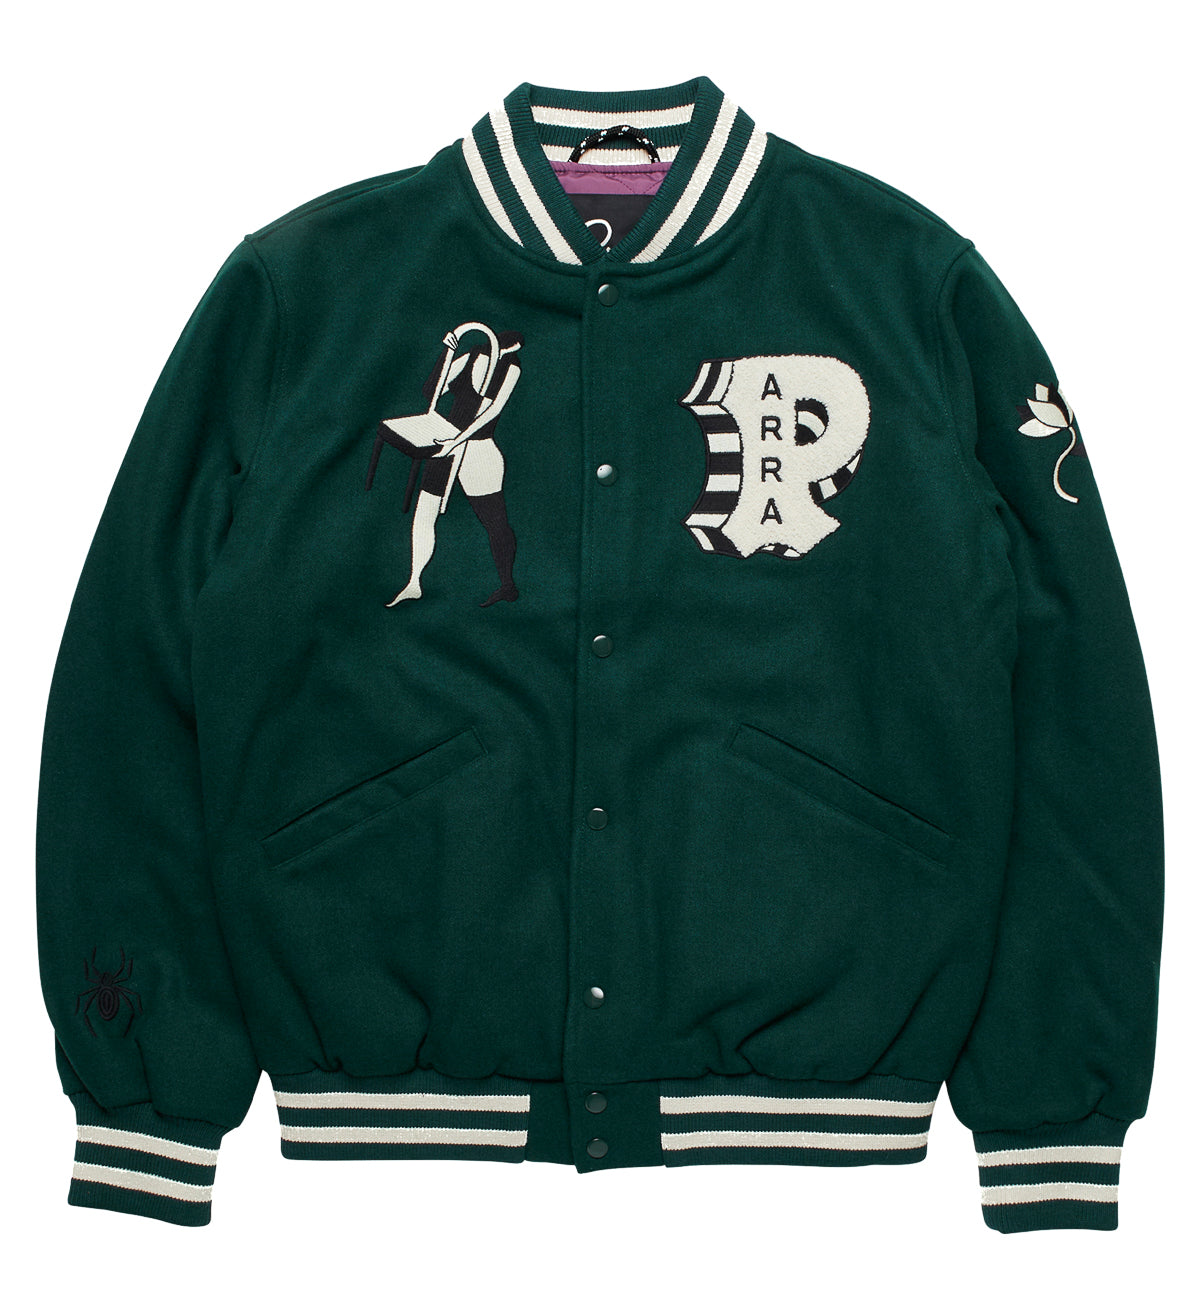 by Parra Cloudy Star Varsity Jacket 'Pine Green'